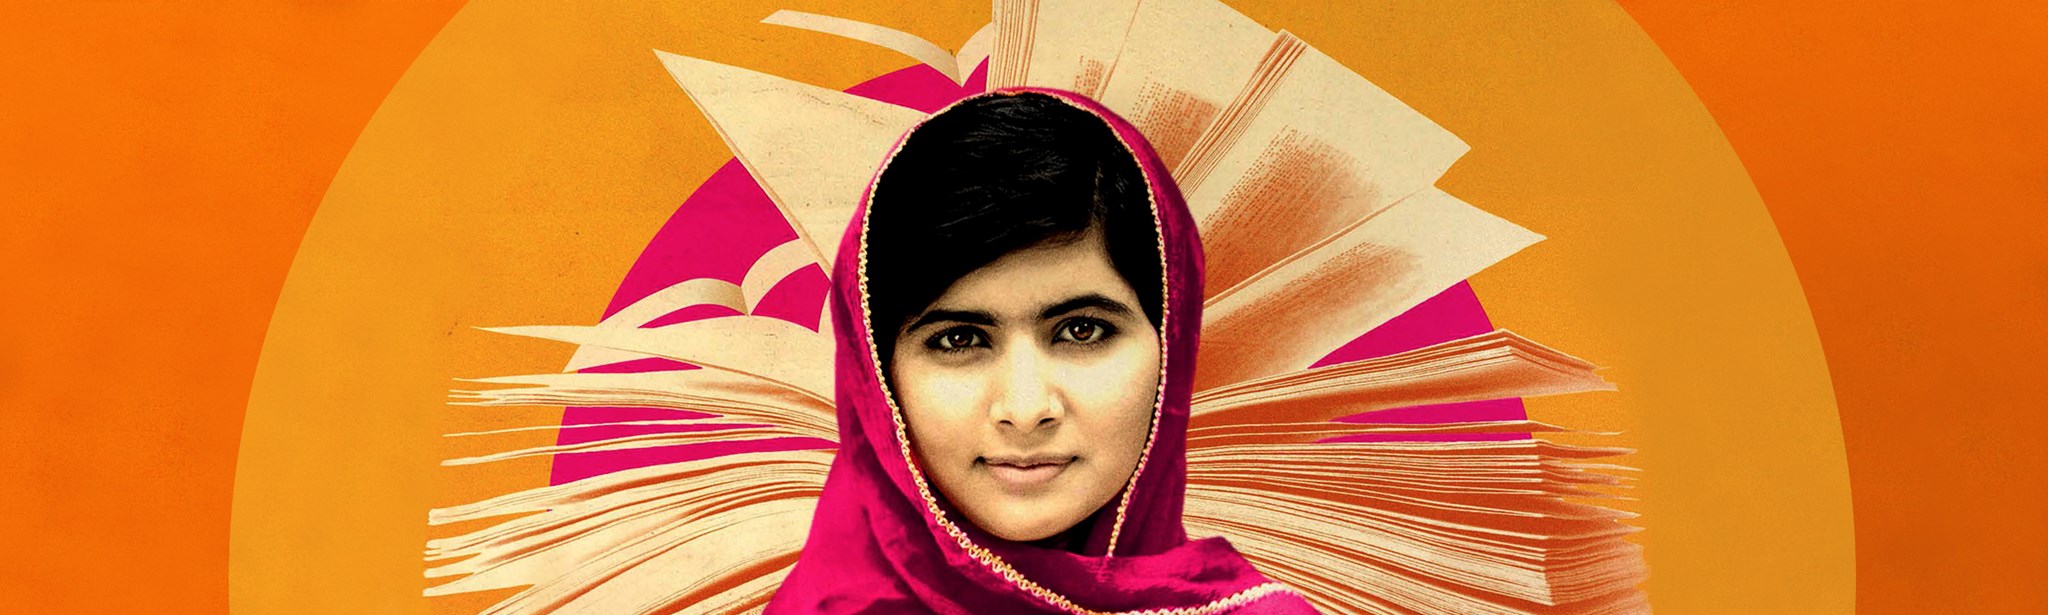 Nice Images Collection: He Named Me Malala Desktop Wallpapers